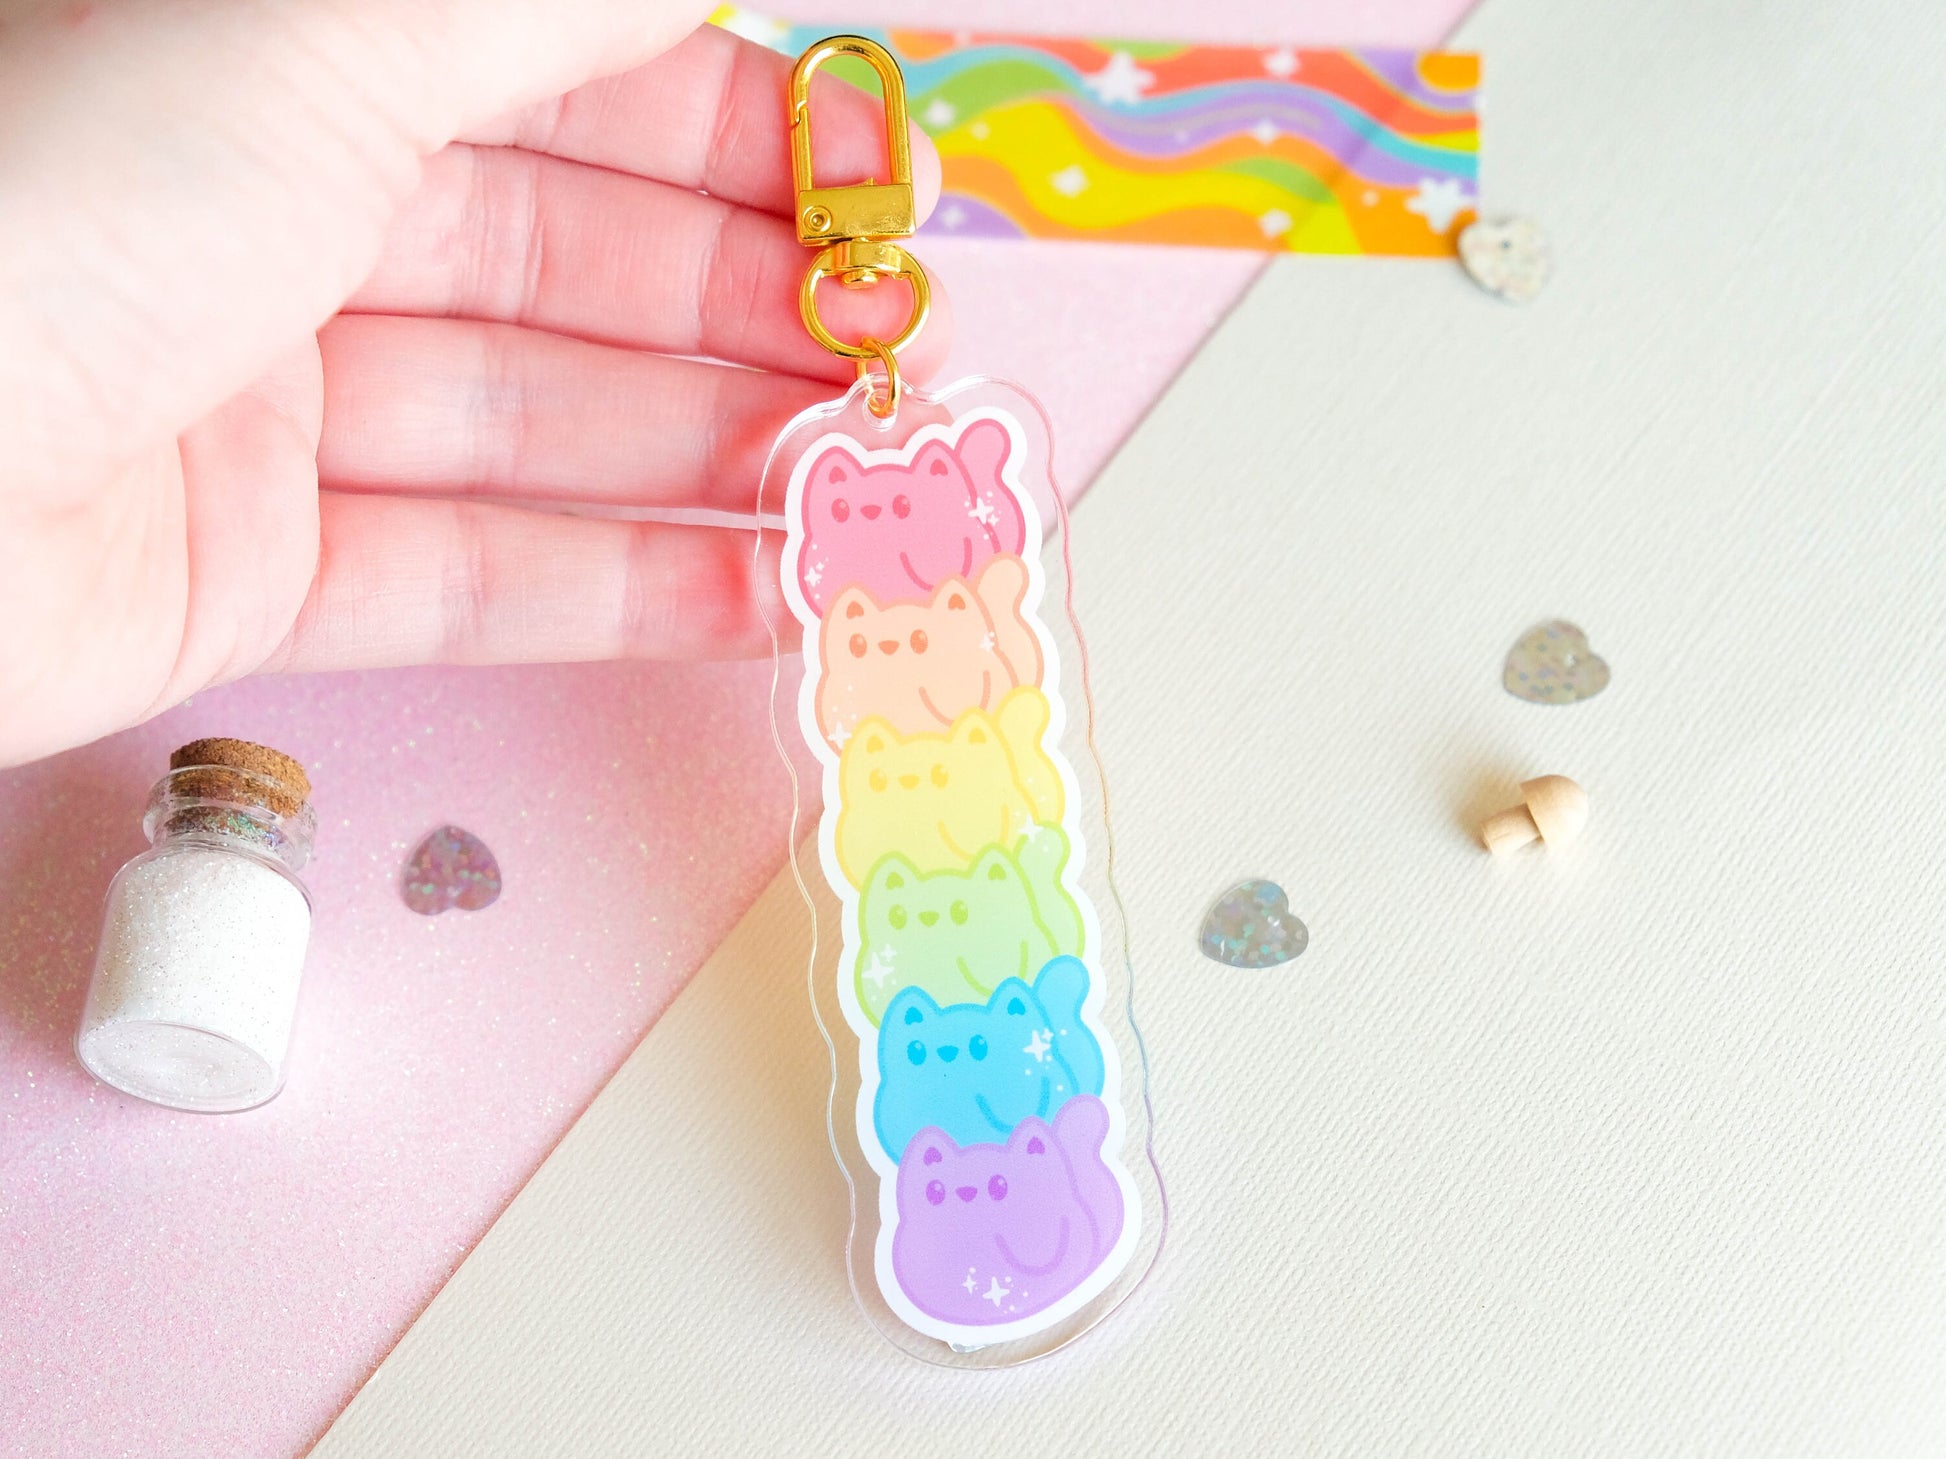 Keychain multicolored rainbow acrylic cat double-sided, perfect for adding a touch of kawaii to your keys, bags, and bullet journal